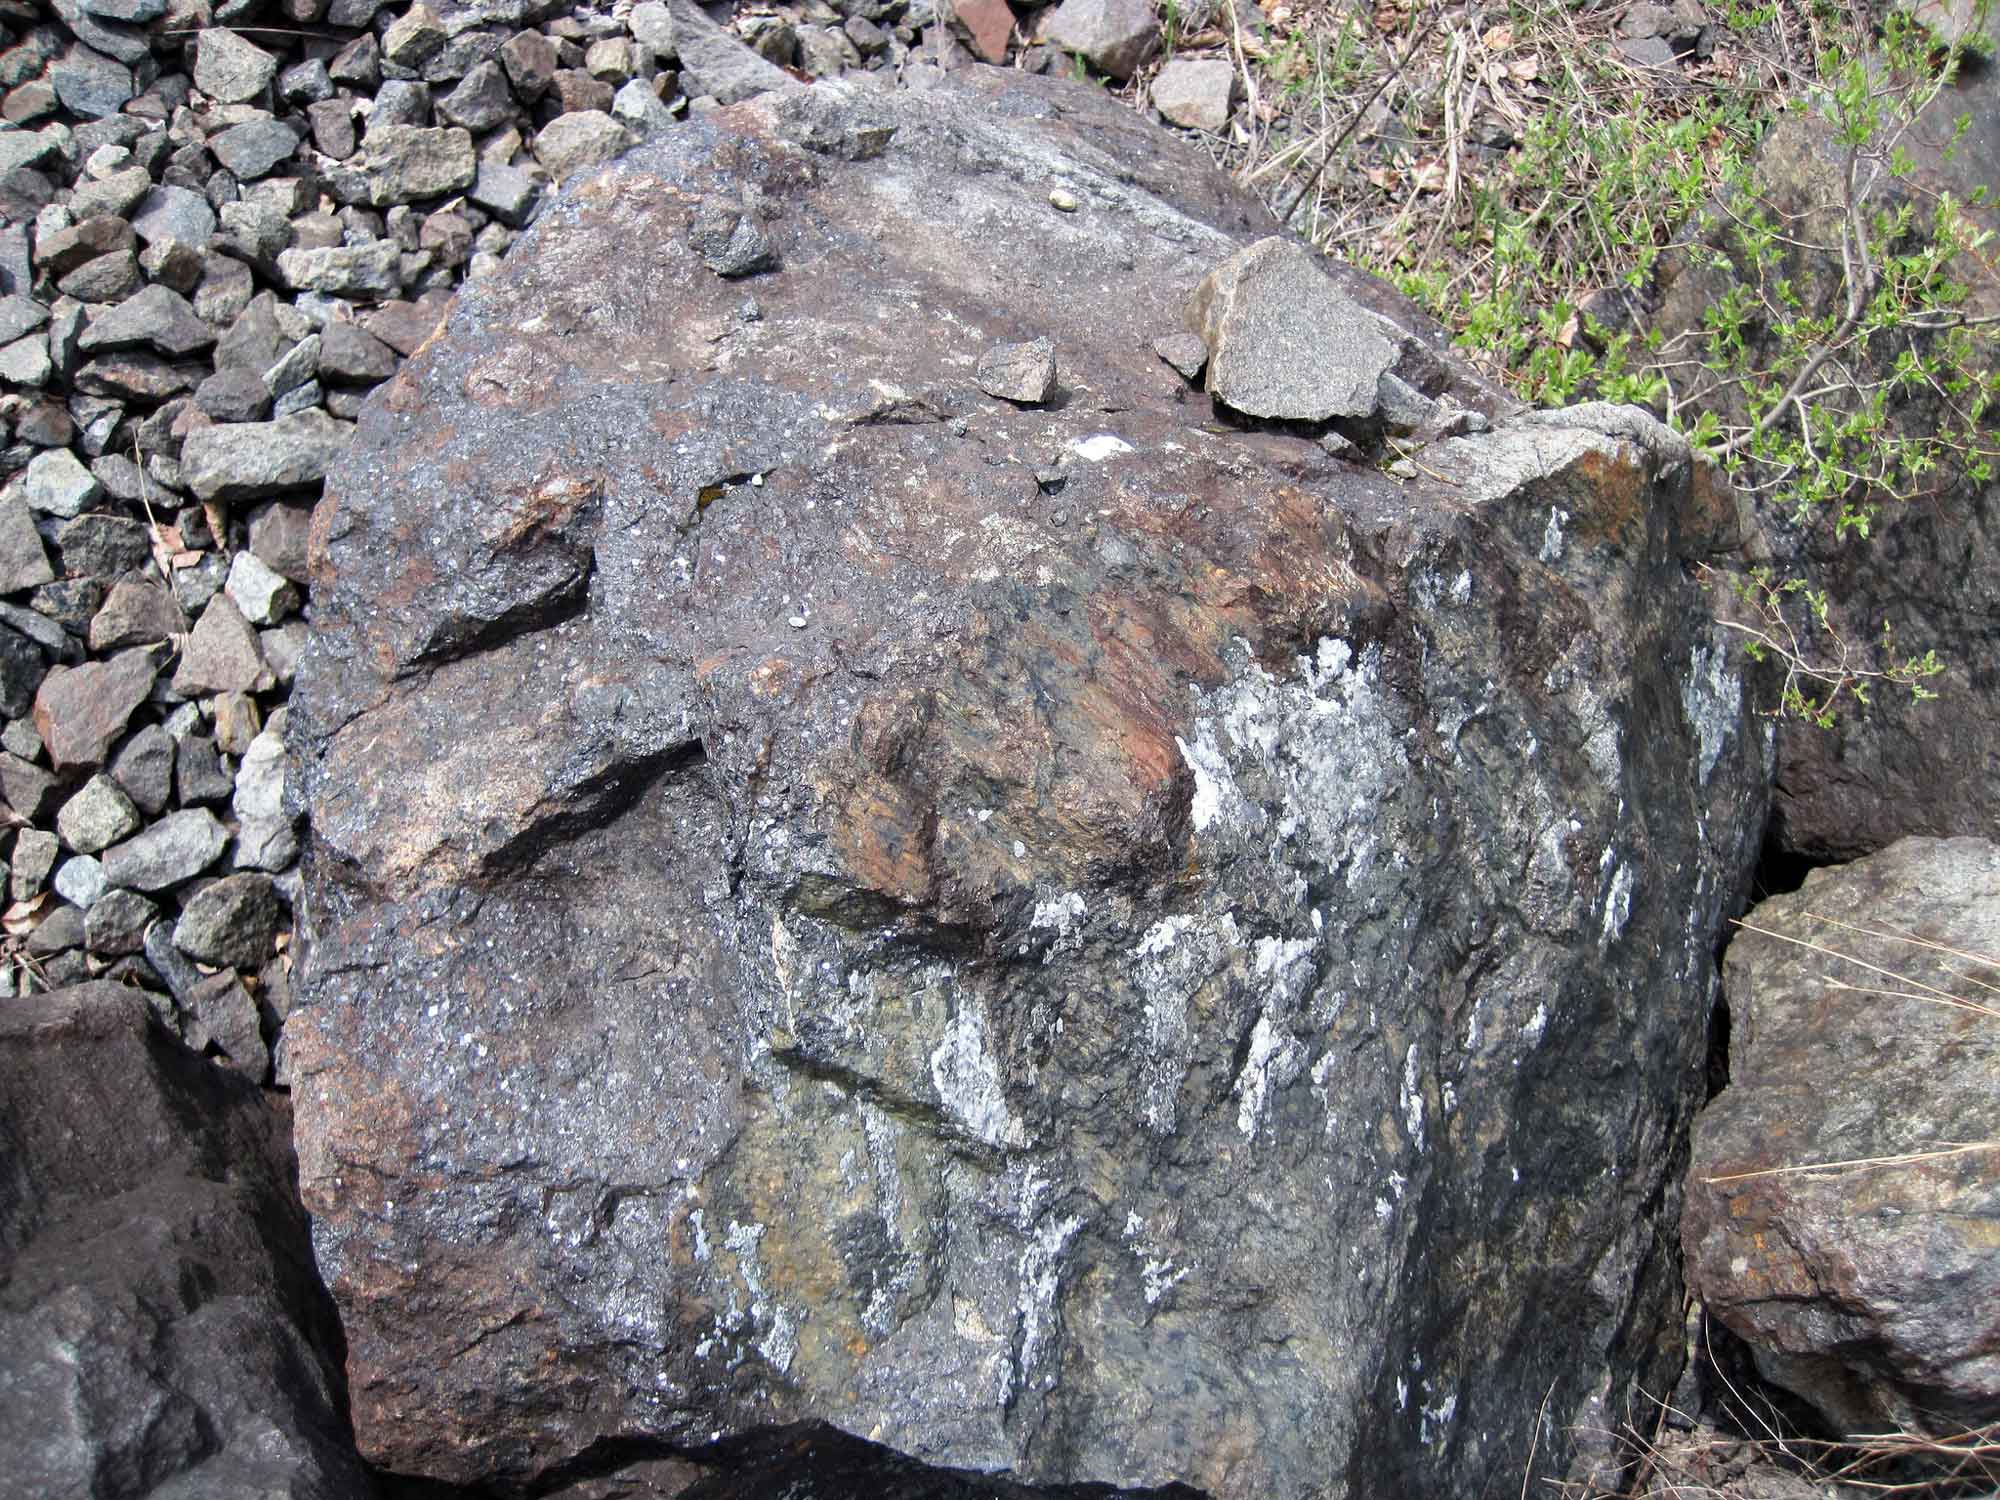 Photograph of a rock containing magnetite and ilmenite from the Precambrian of the Adirondacks.